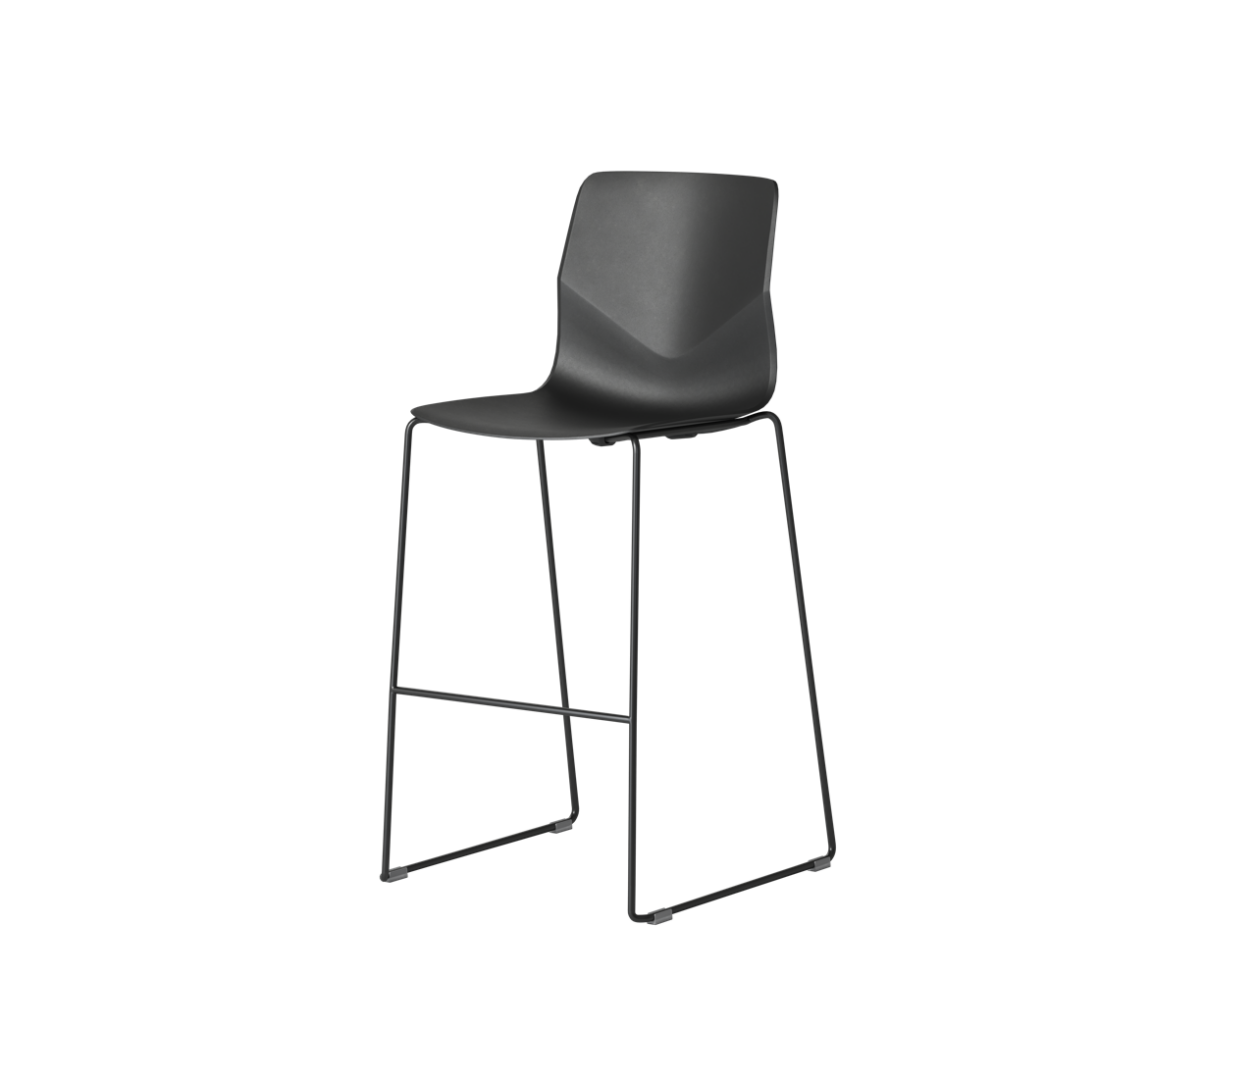 OCEE&FOUR – Chairs – FourSure 105 – Packshot Image 3 Large Large